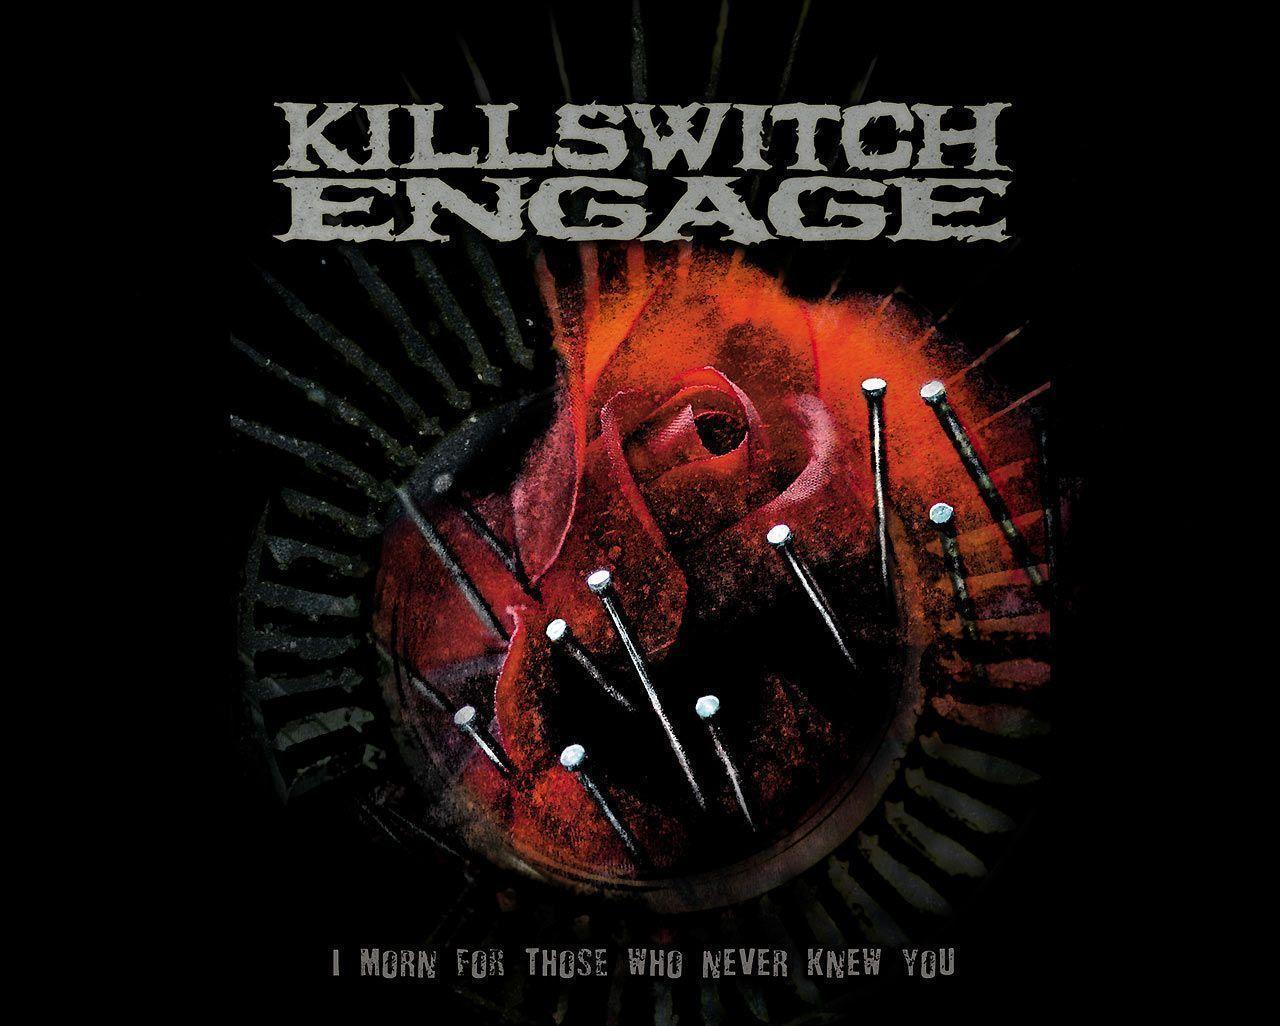 Killswitch Engage backgrounds wallpapers